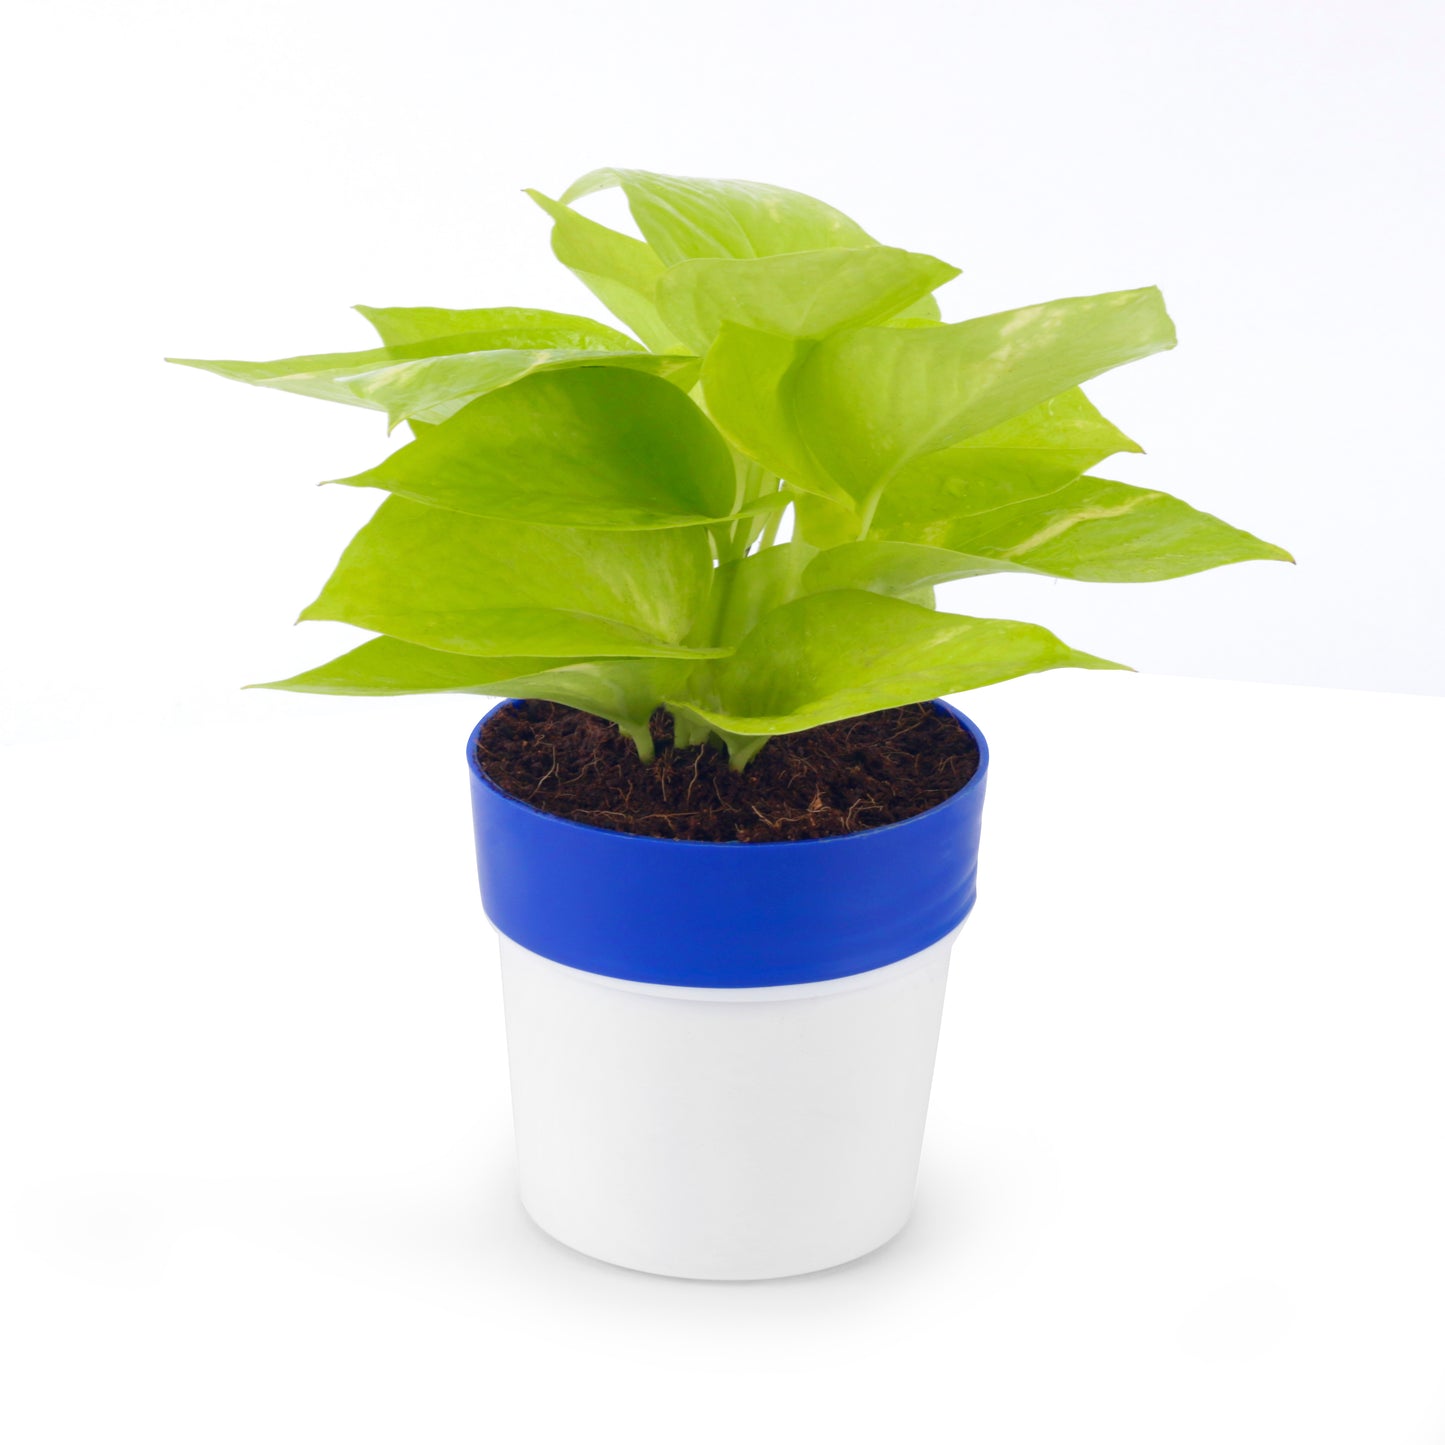 Golden Money Plant With Blue and White Round Pot